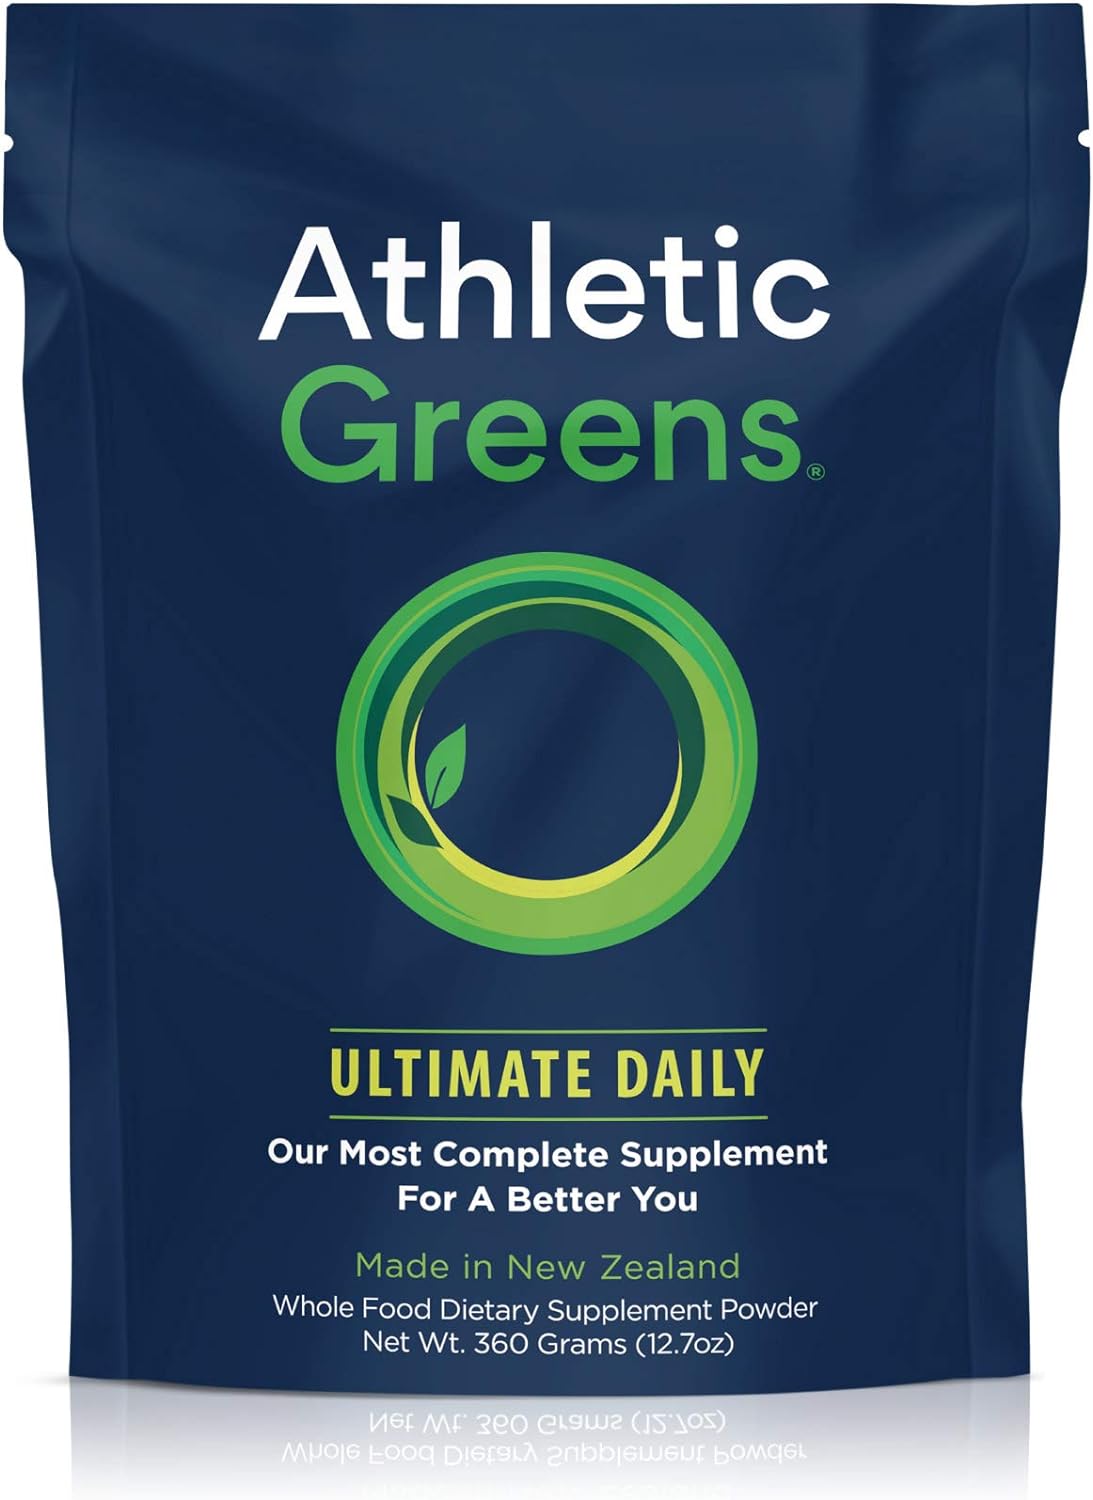 AG1 athletic greens